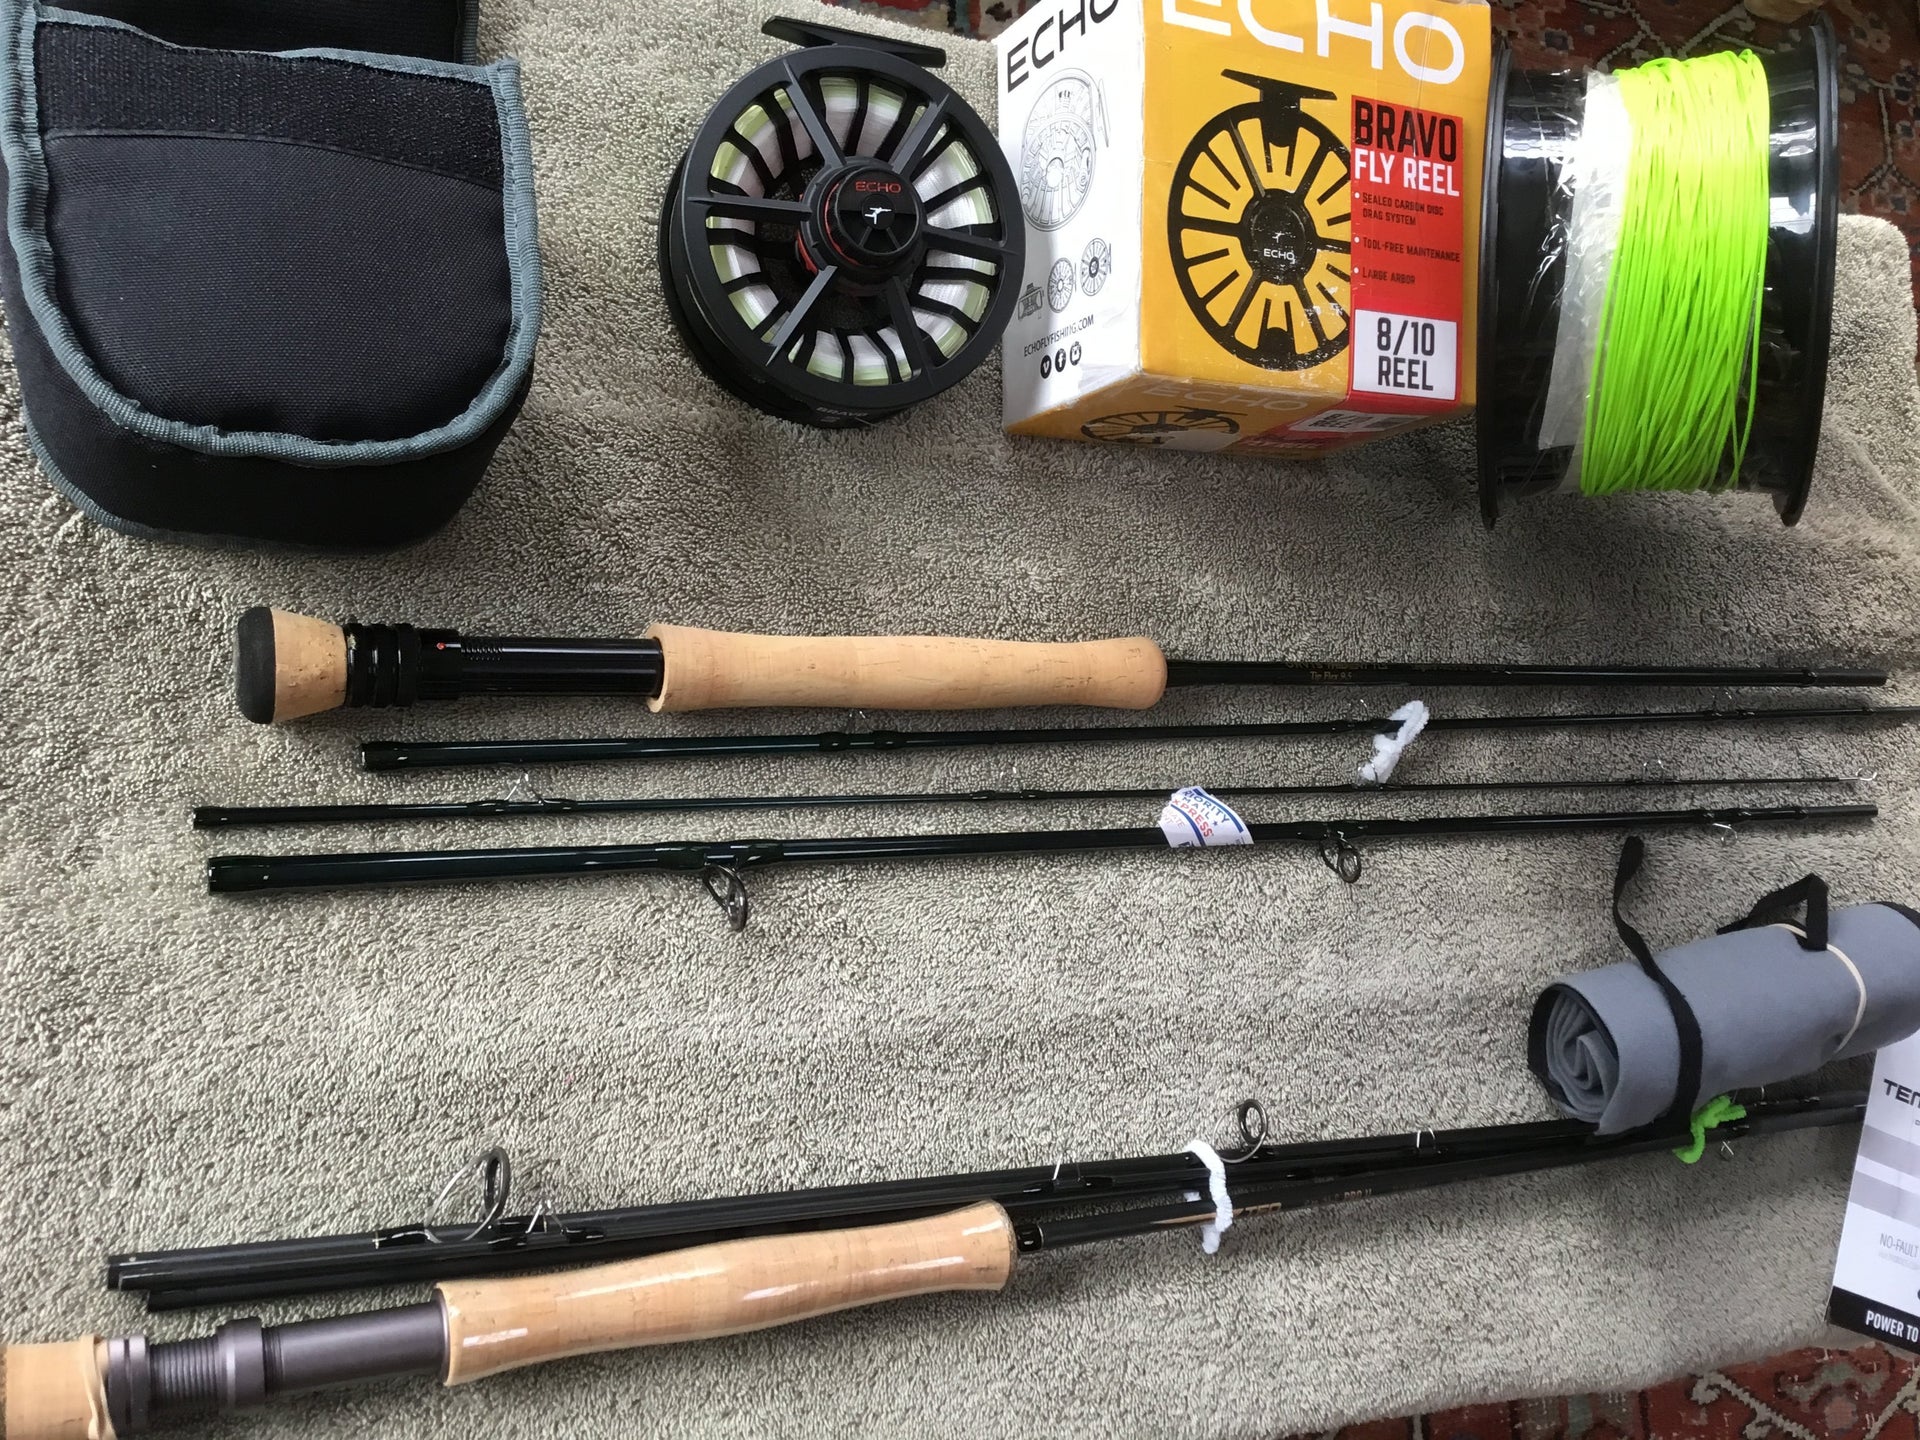 10 wt ~ new ~ rods ,reel ,line ~ Orvis ,tfo .echo .Rio ~ have an extra combo  for sale ~great value.